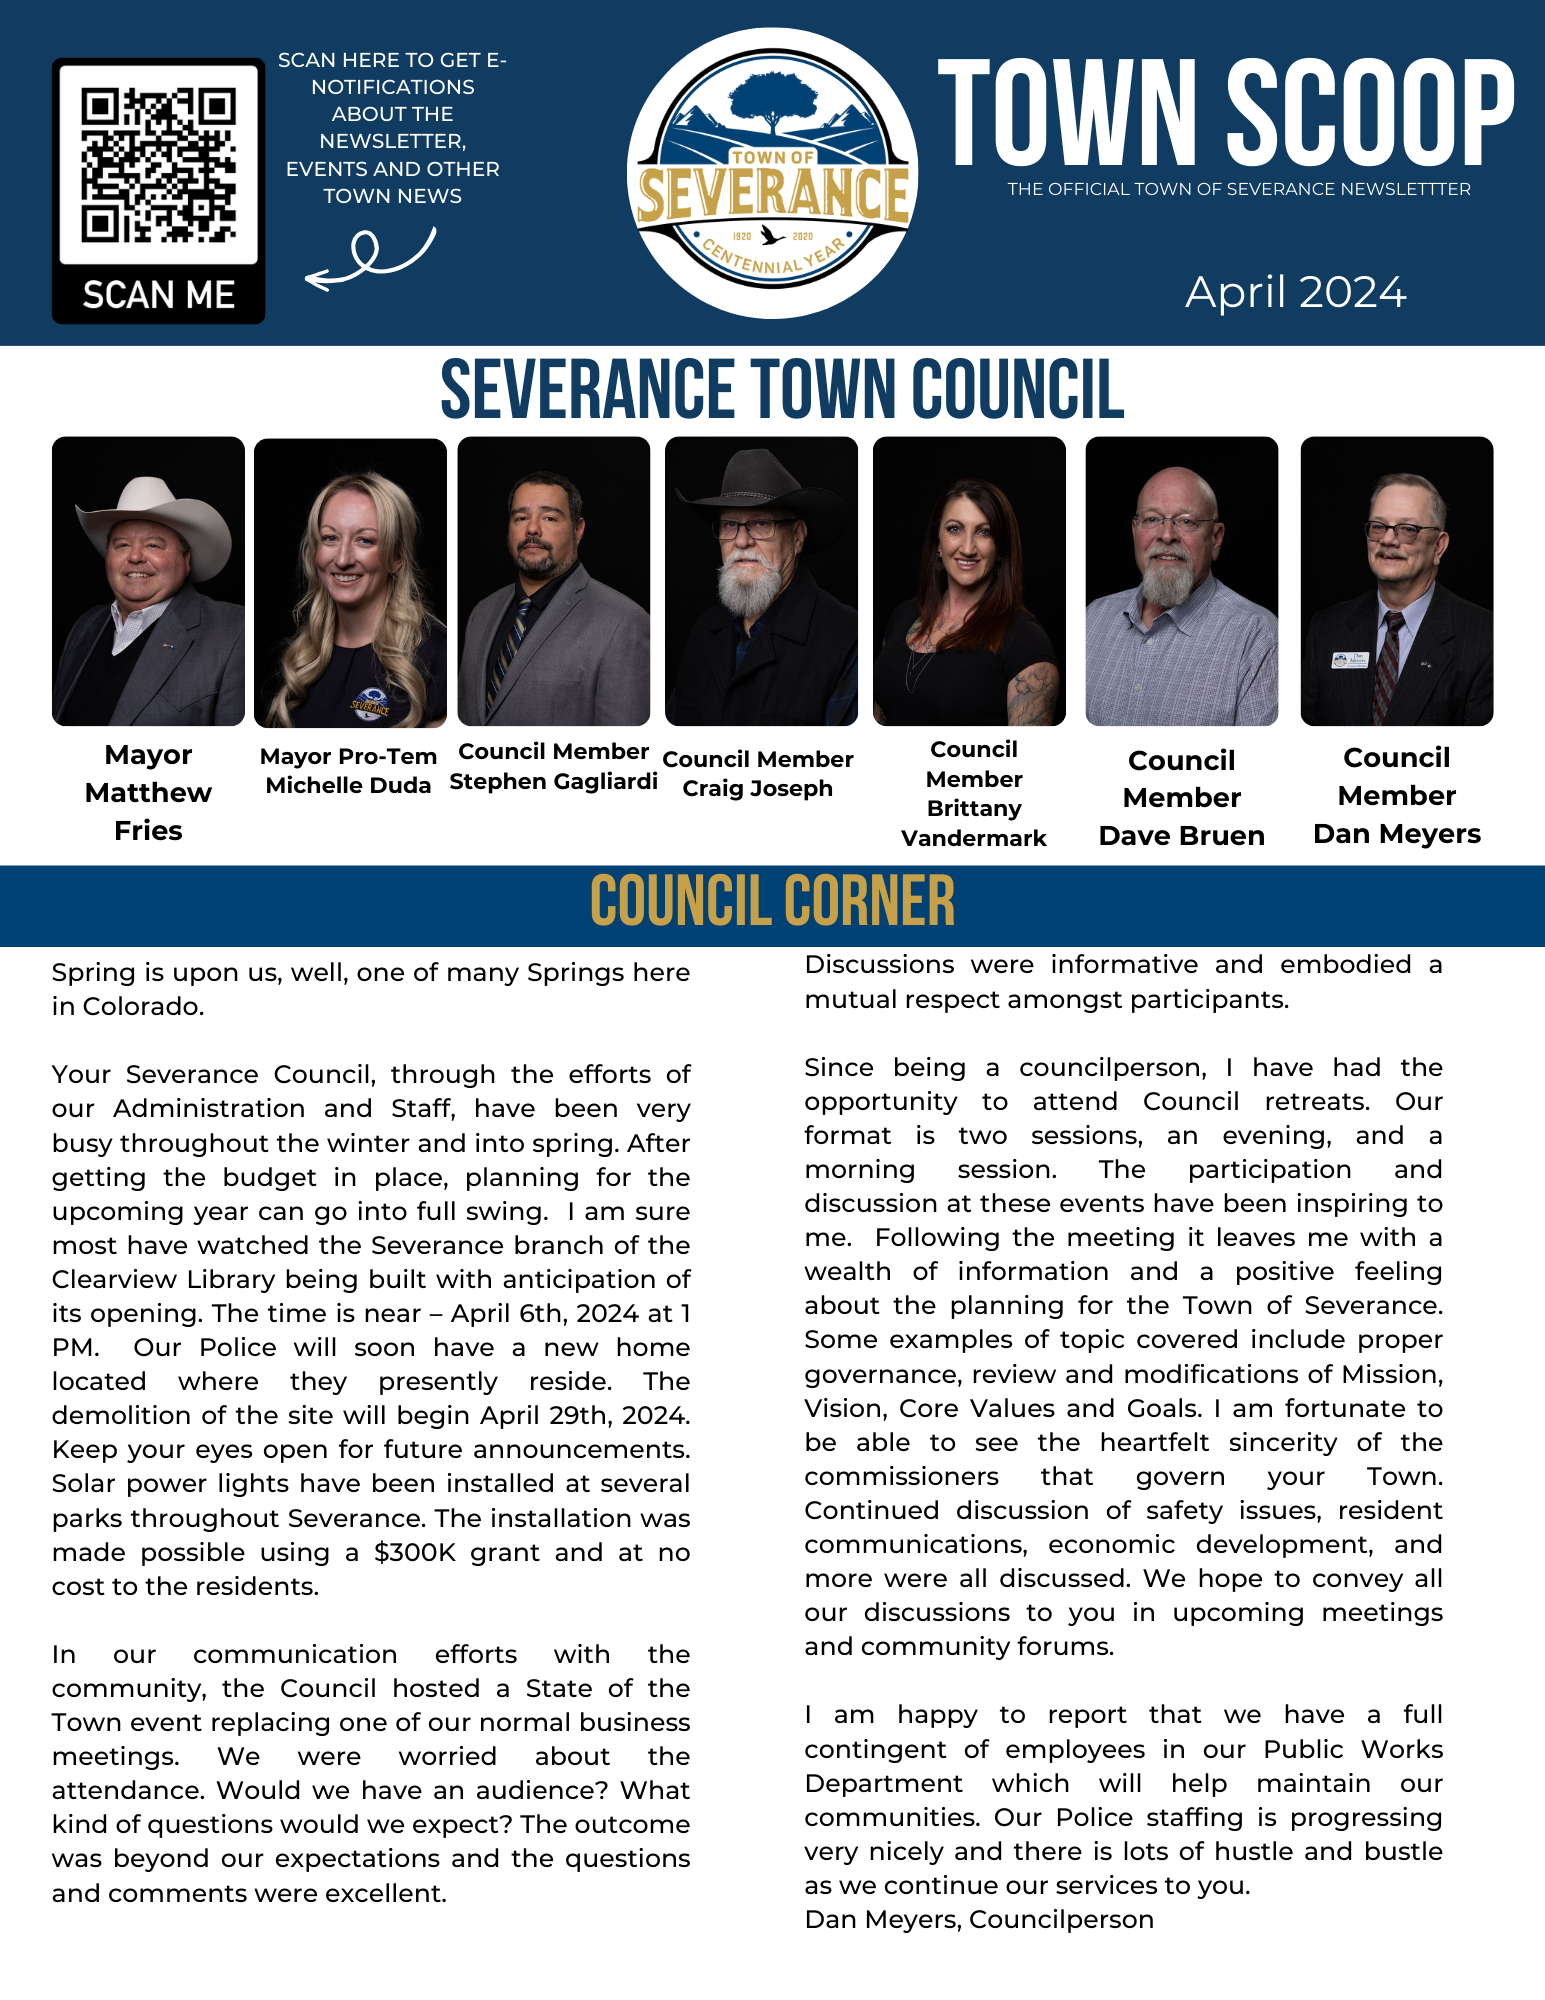 Front page of April 2024 Newsletter